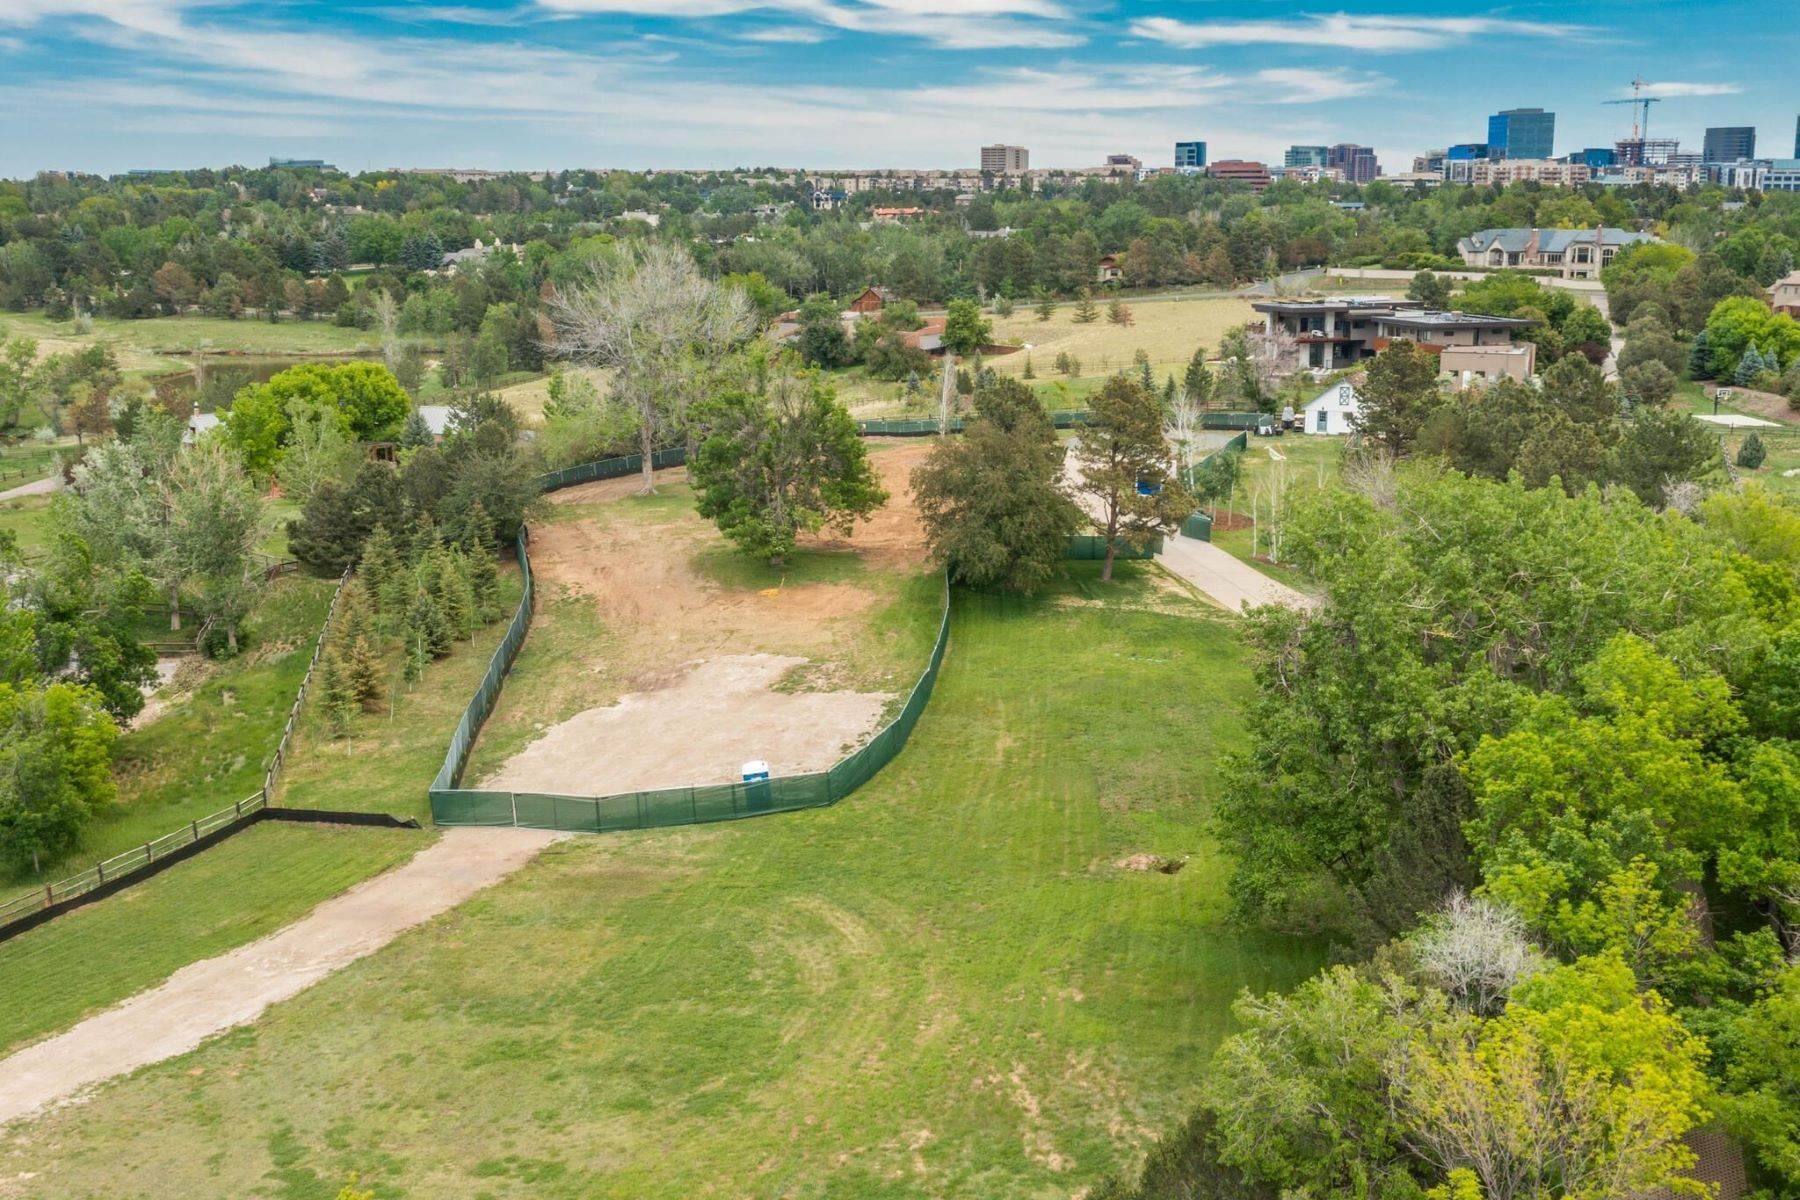 Property for Active at 4970 S Fairfax Street, Cherry Hills Village, CO, 80121 4970 S Fairfax Street Cherry Hills Village, Colorado 80121 United States